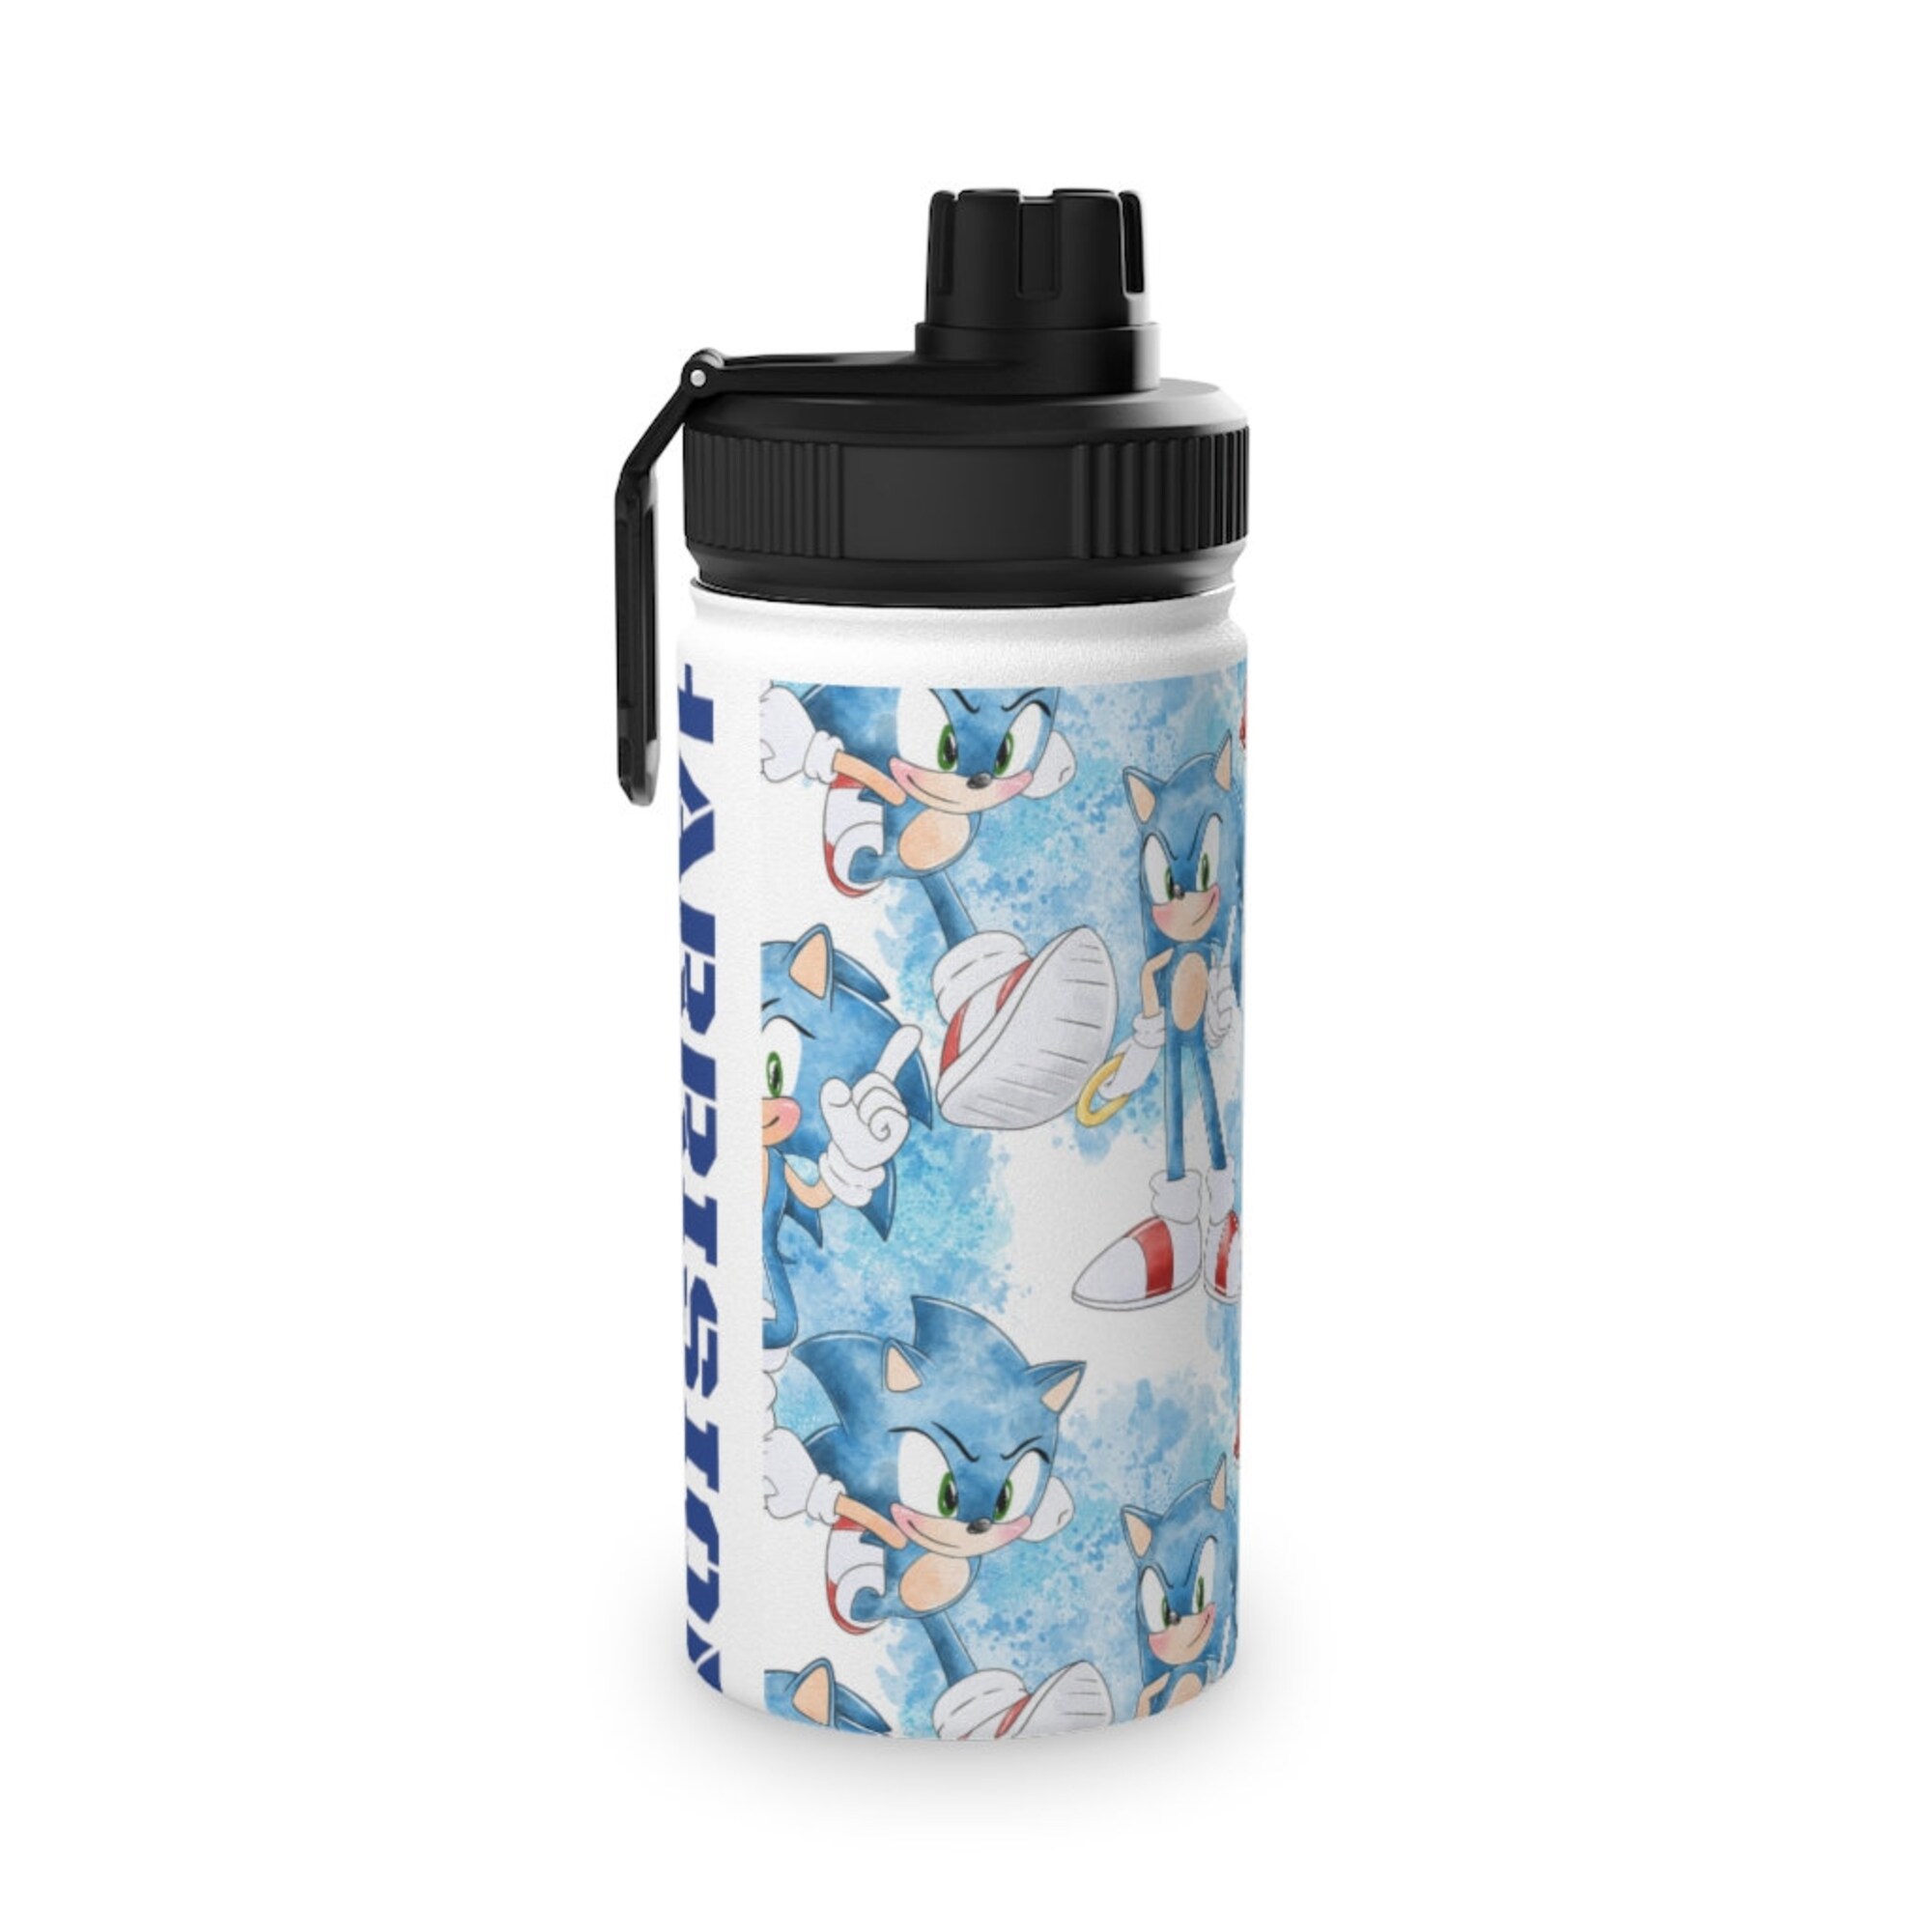 Sonic The Hedgehog Stainless Steel Water Bottle, Sports Lid